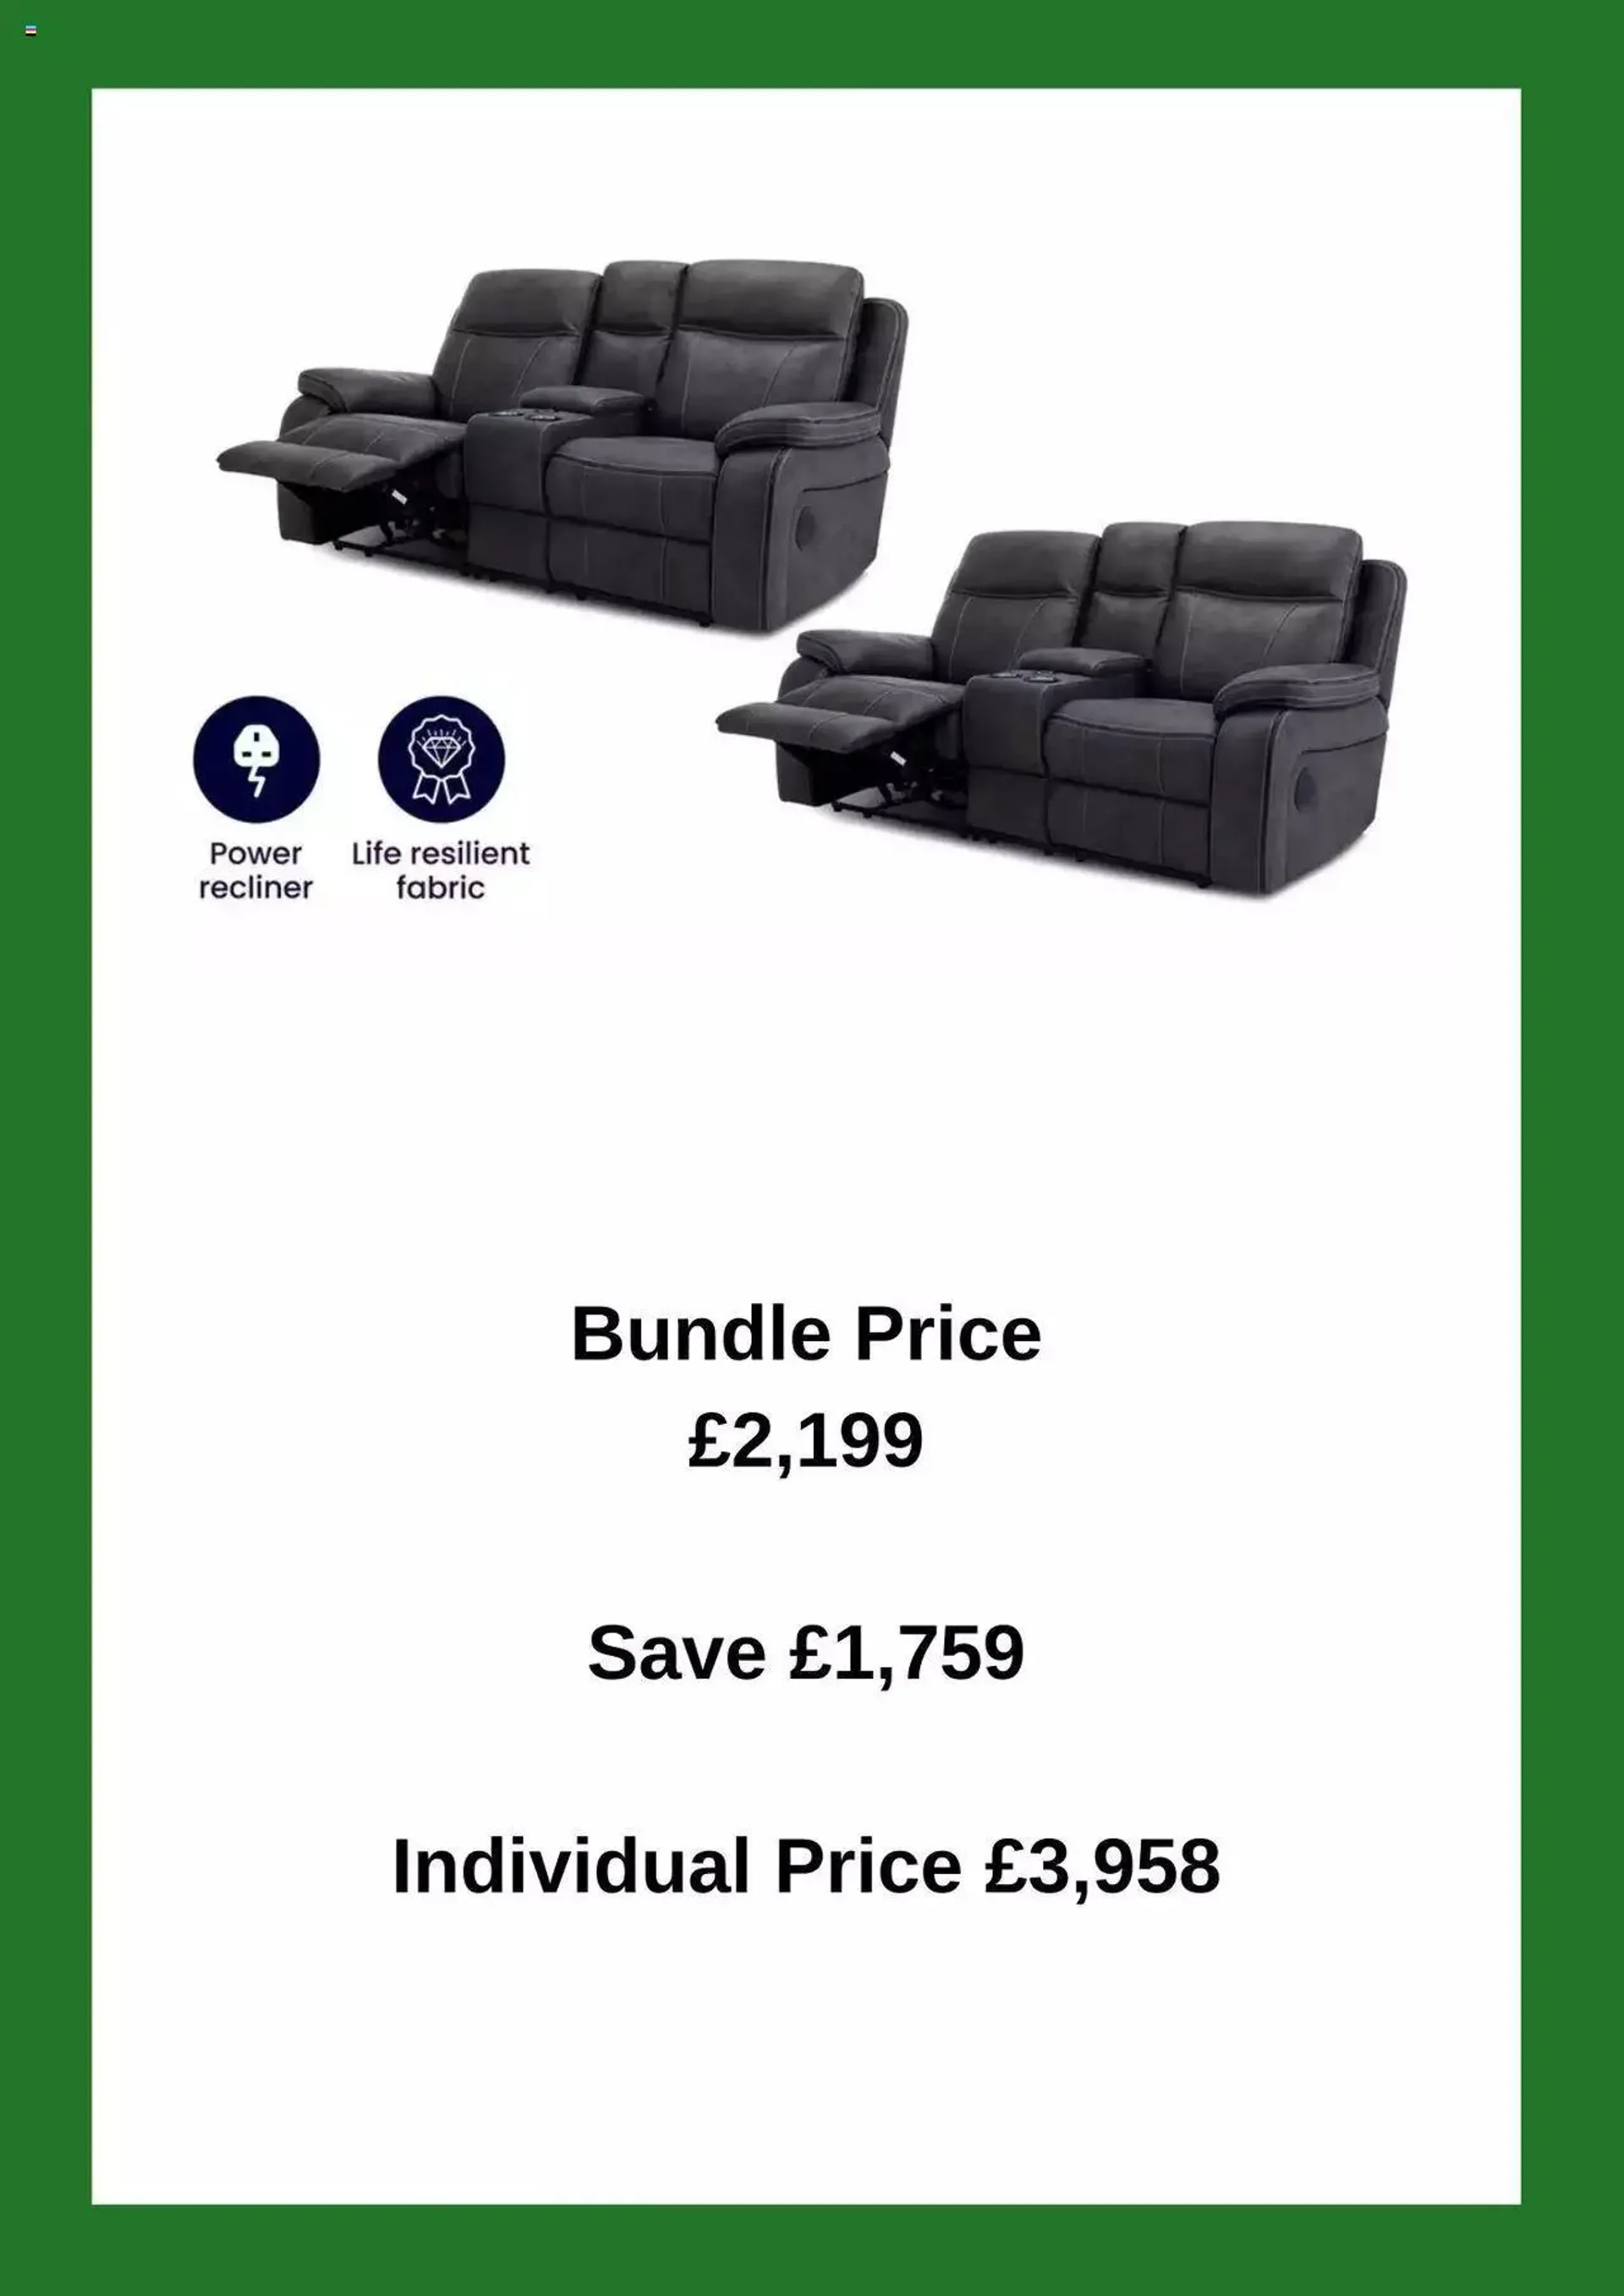 DFS offers - 1